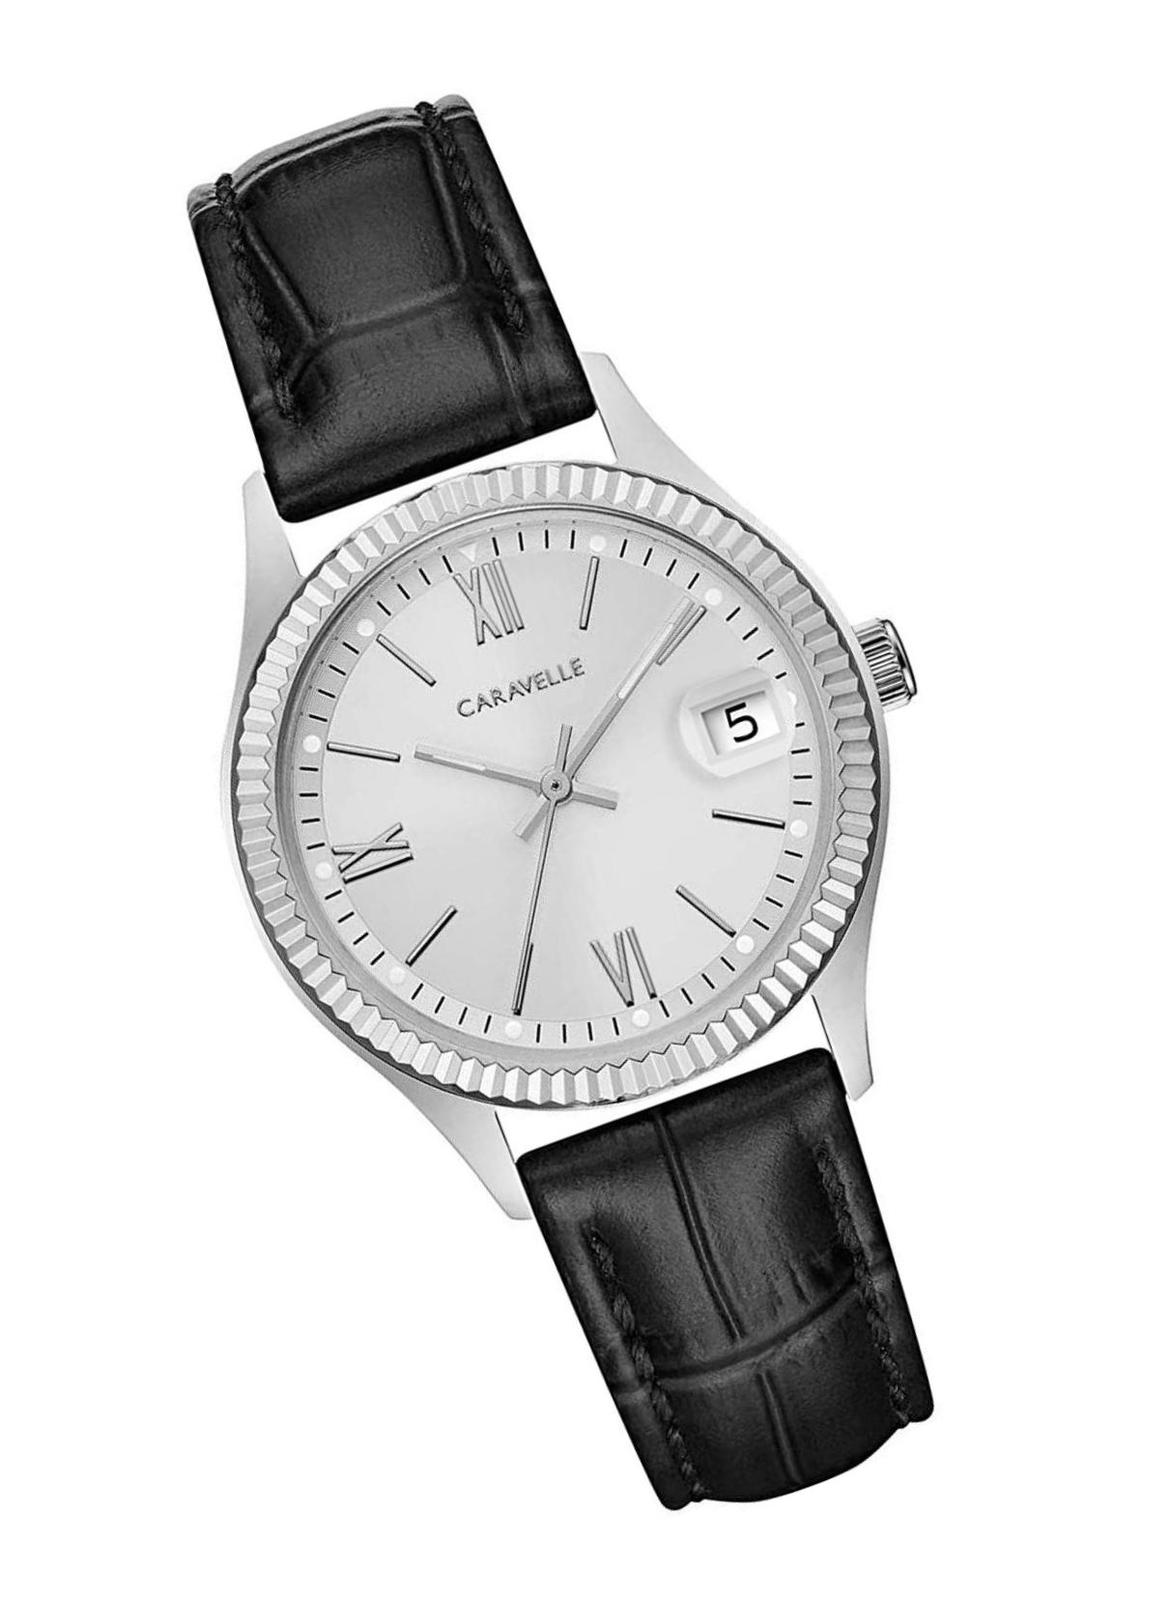 Caravelle by Dress Quartz Ladies Watch, Stainless - $265.83